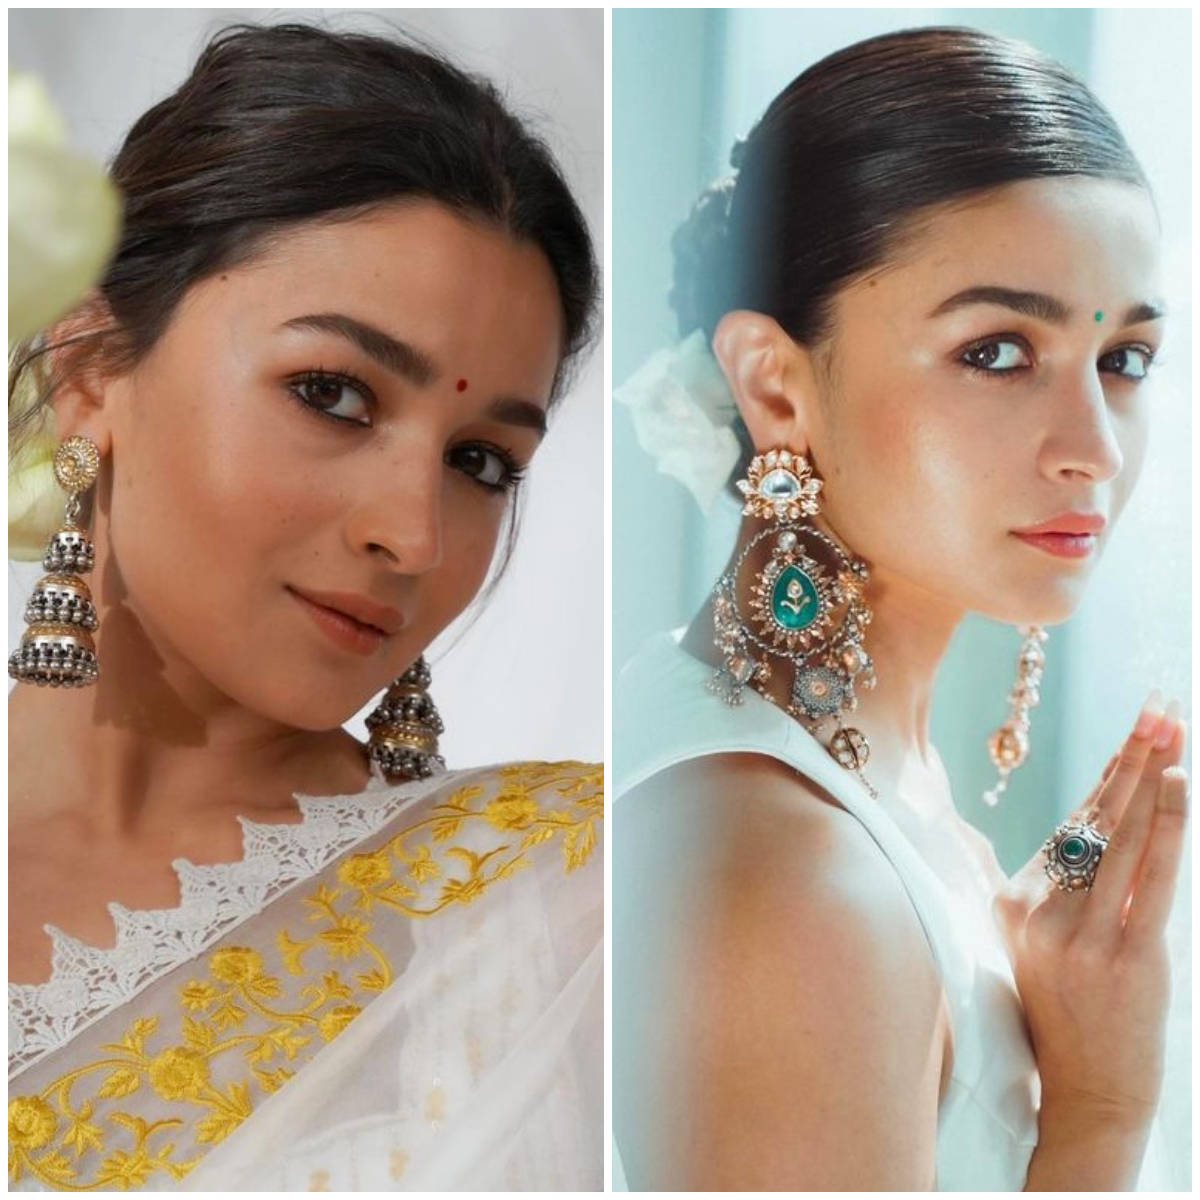 10 of Alia Bhatt's earrings from Gangubai Kathiawadi promotions that are massively bedazzling 